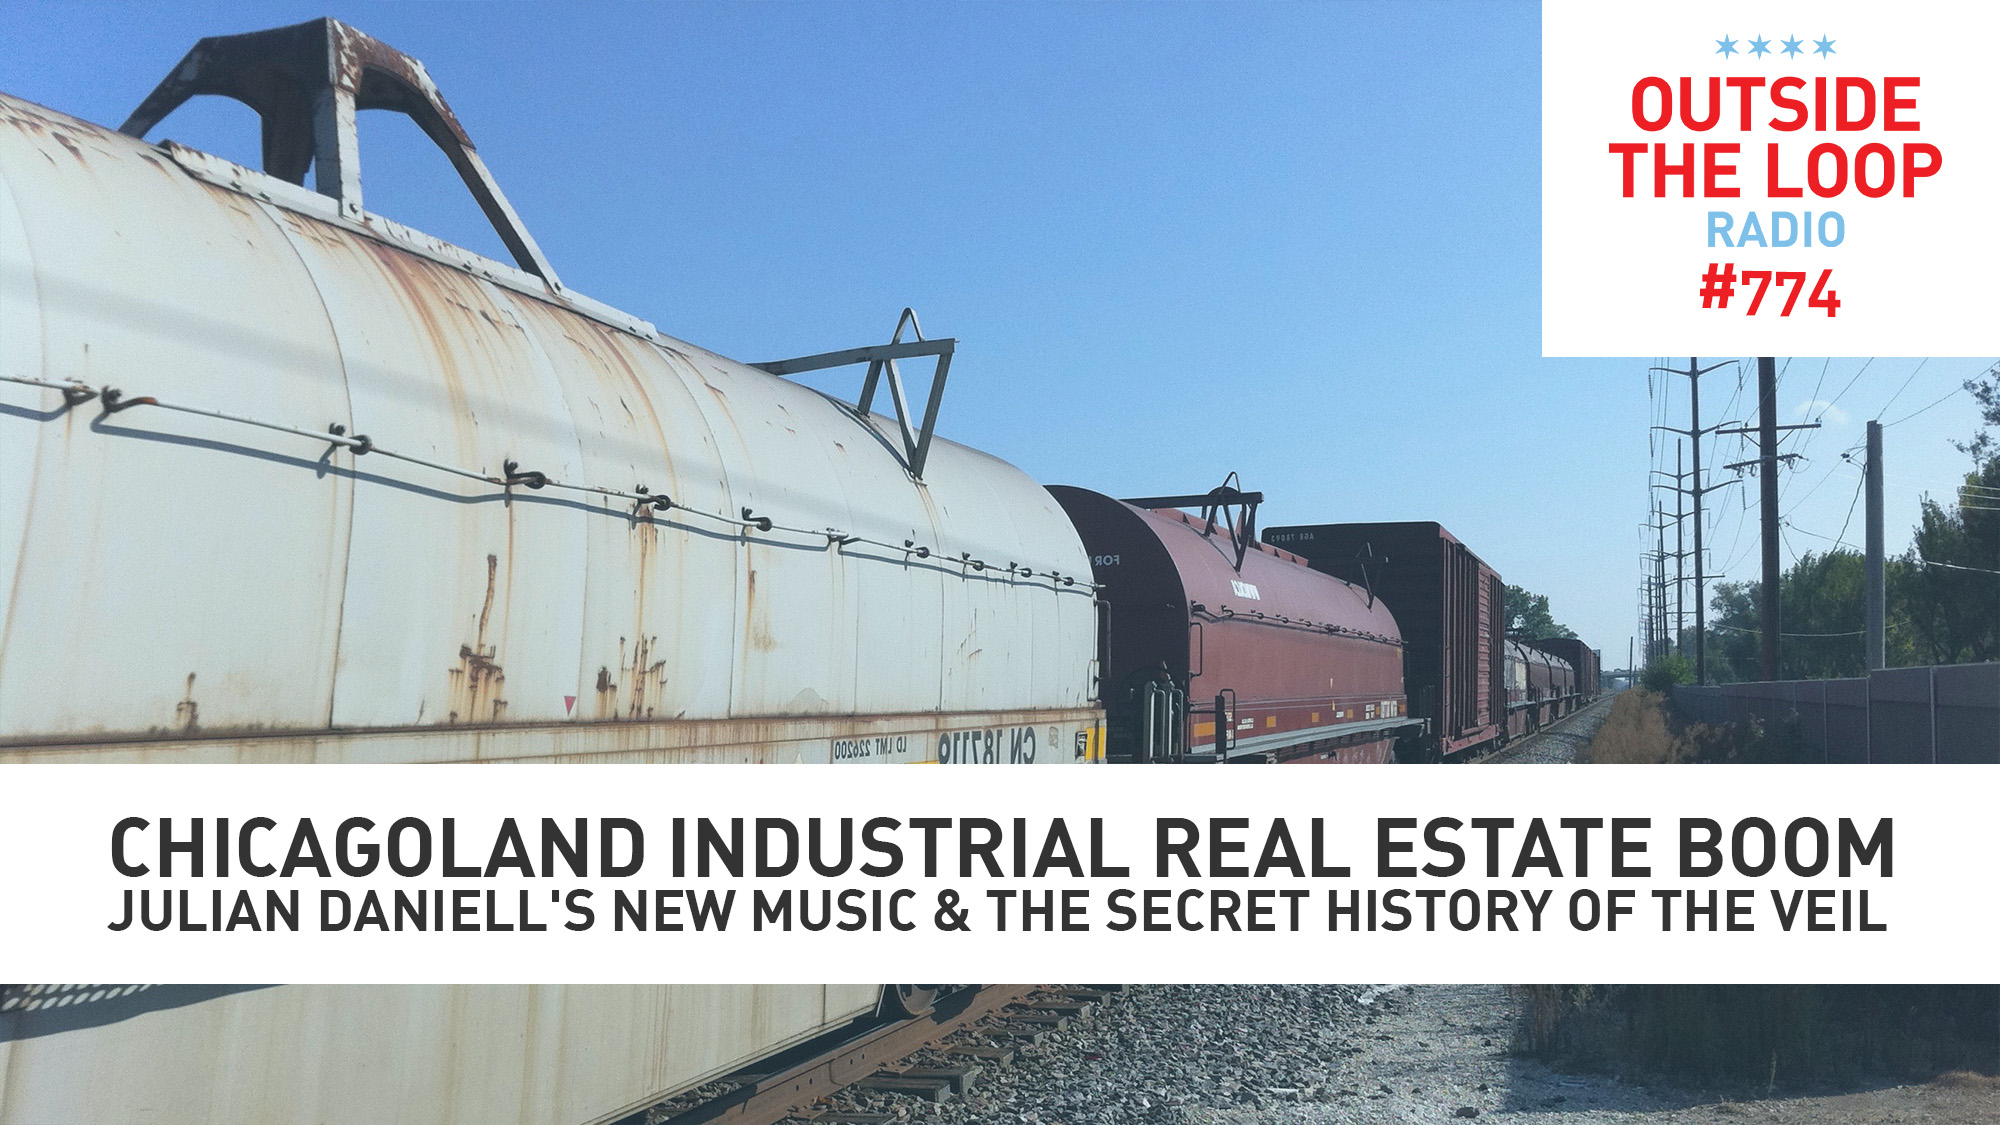 Local industrial real estate is booming. (Photo credit: Mike Stephen/WGN Radio)